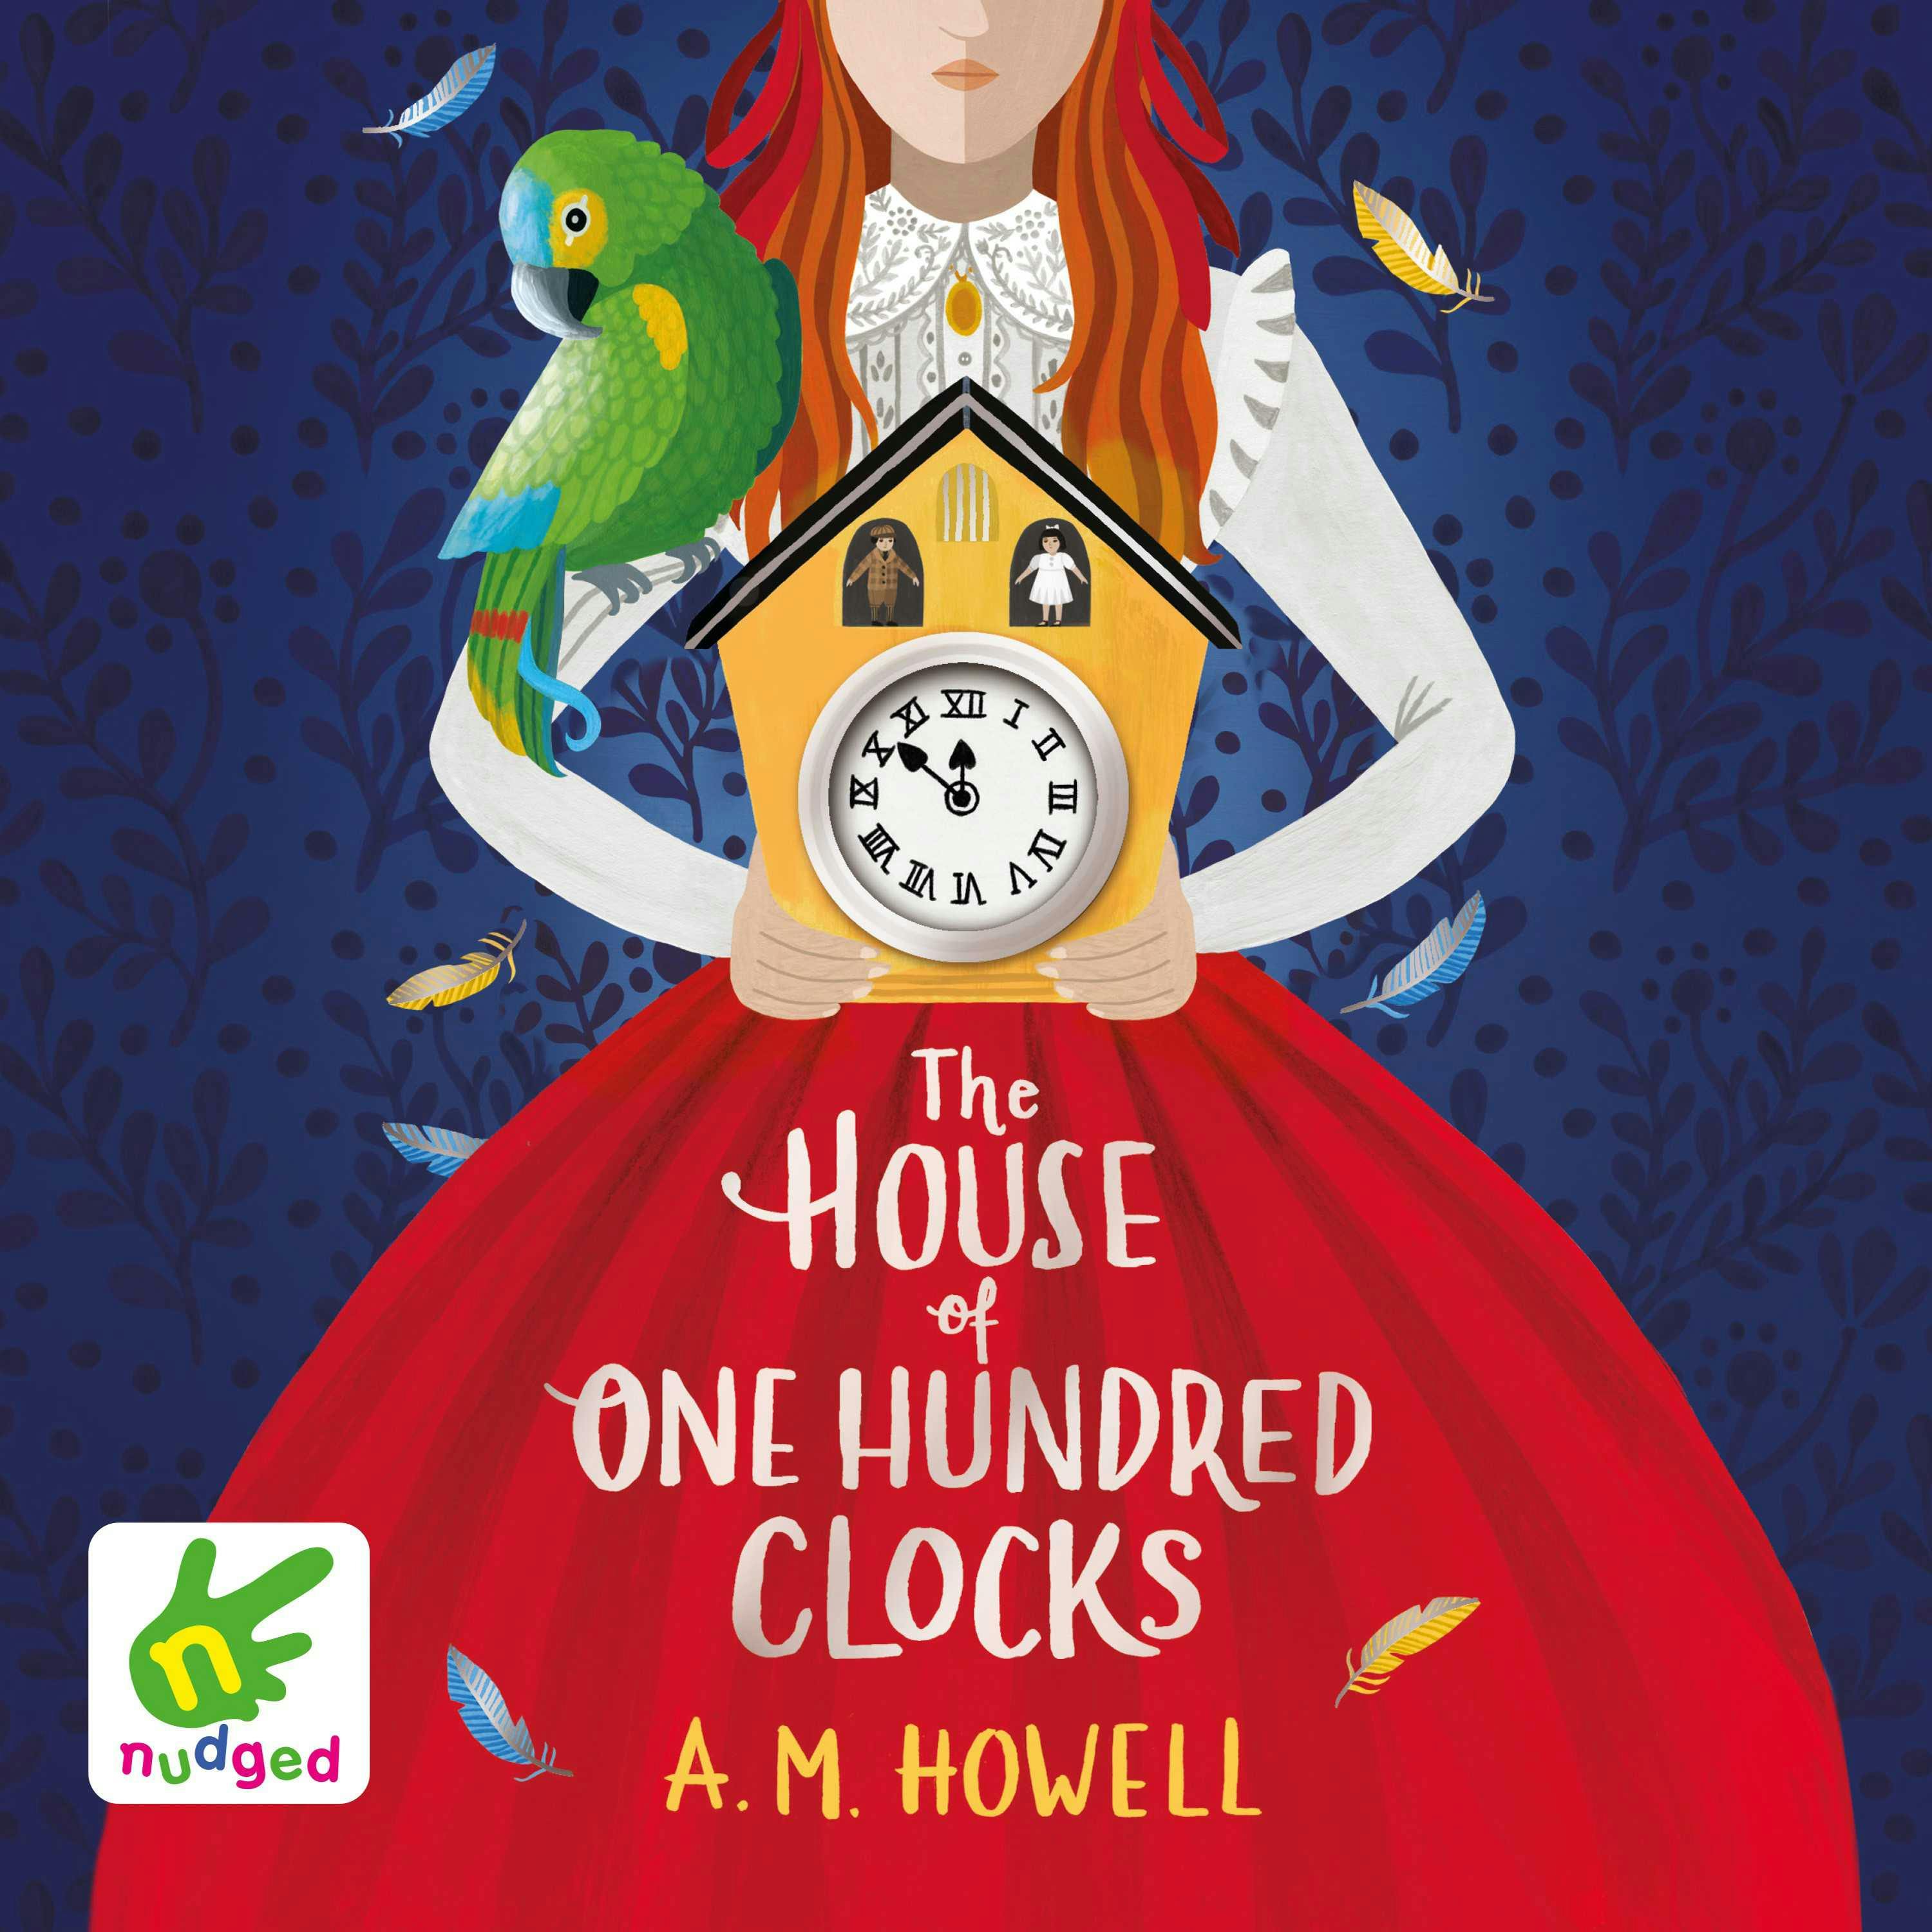 The House of One Hundred Clocks - A.M. Howell